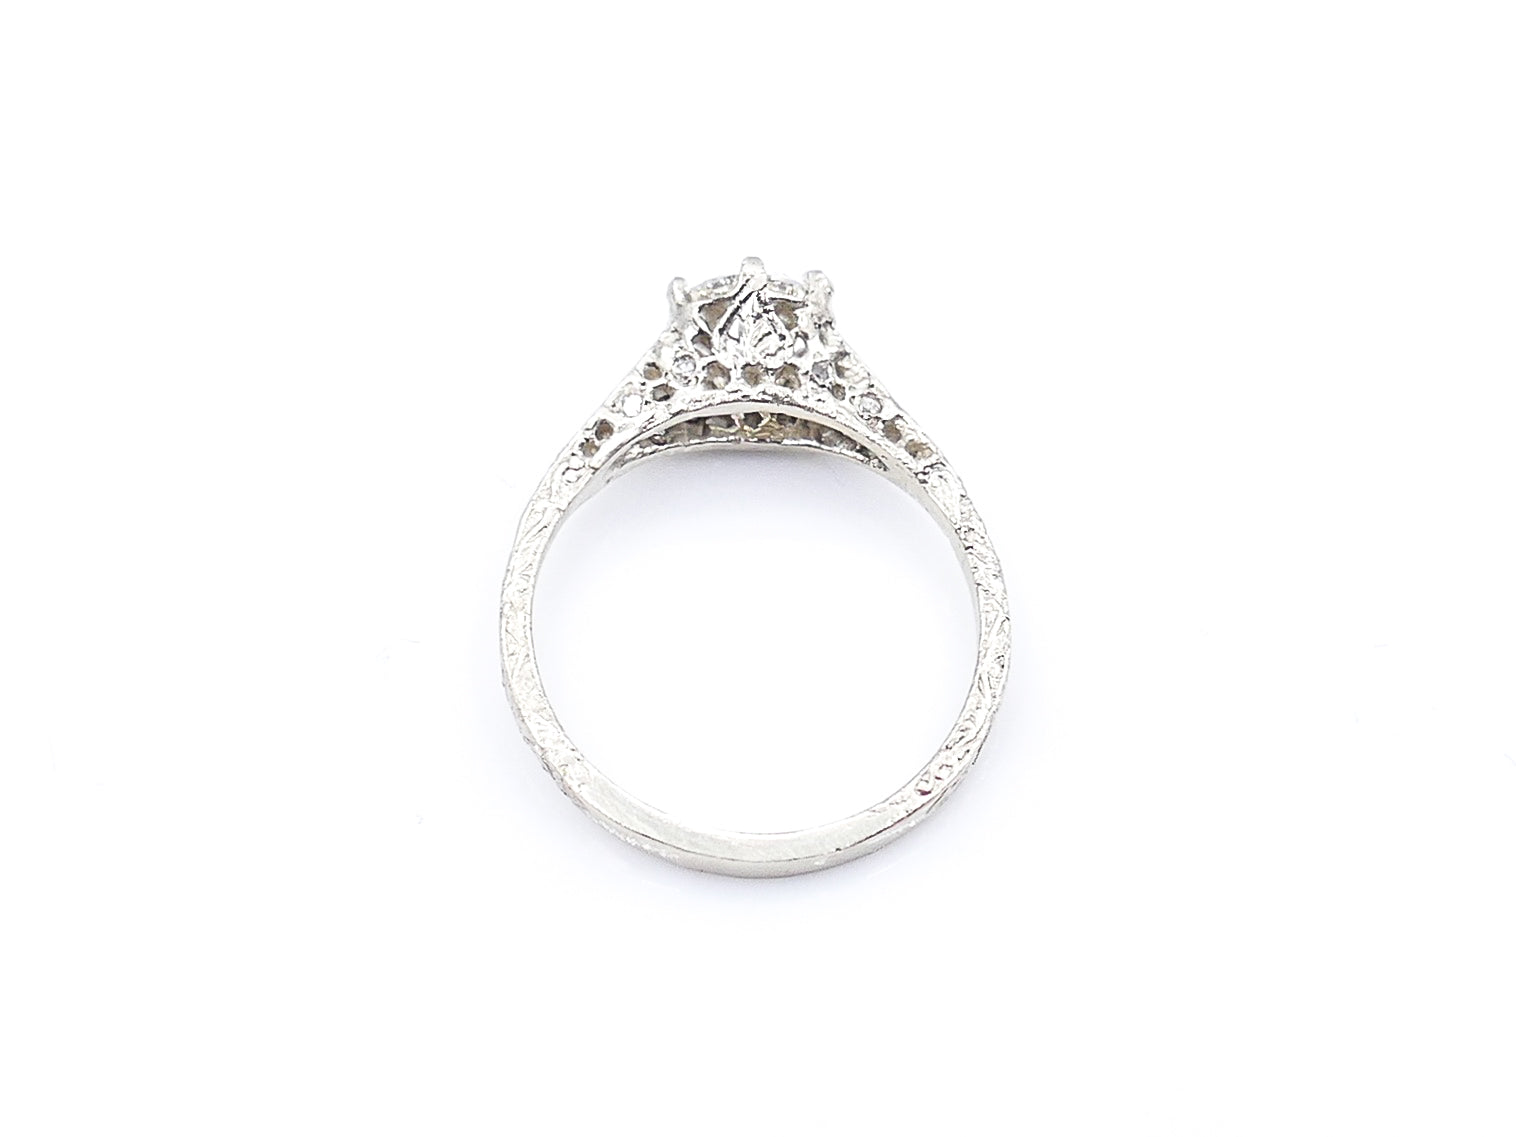 Antique-Style Filigree Diamond and White Gold Engagement Ring